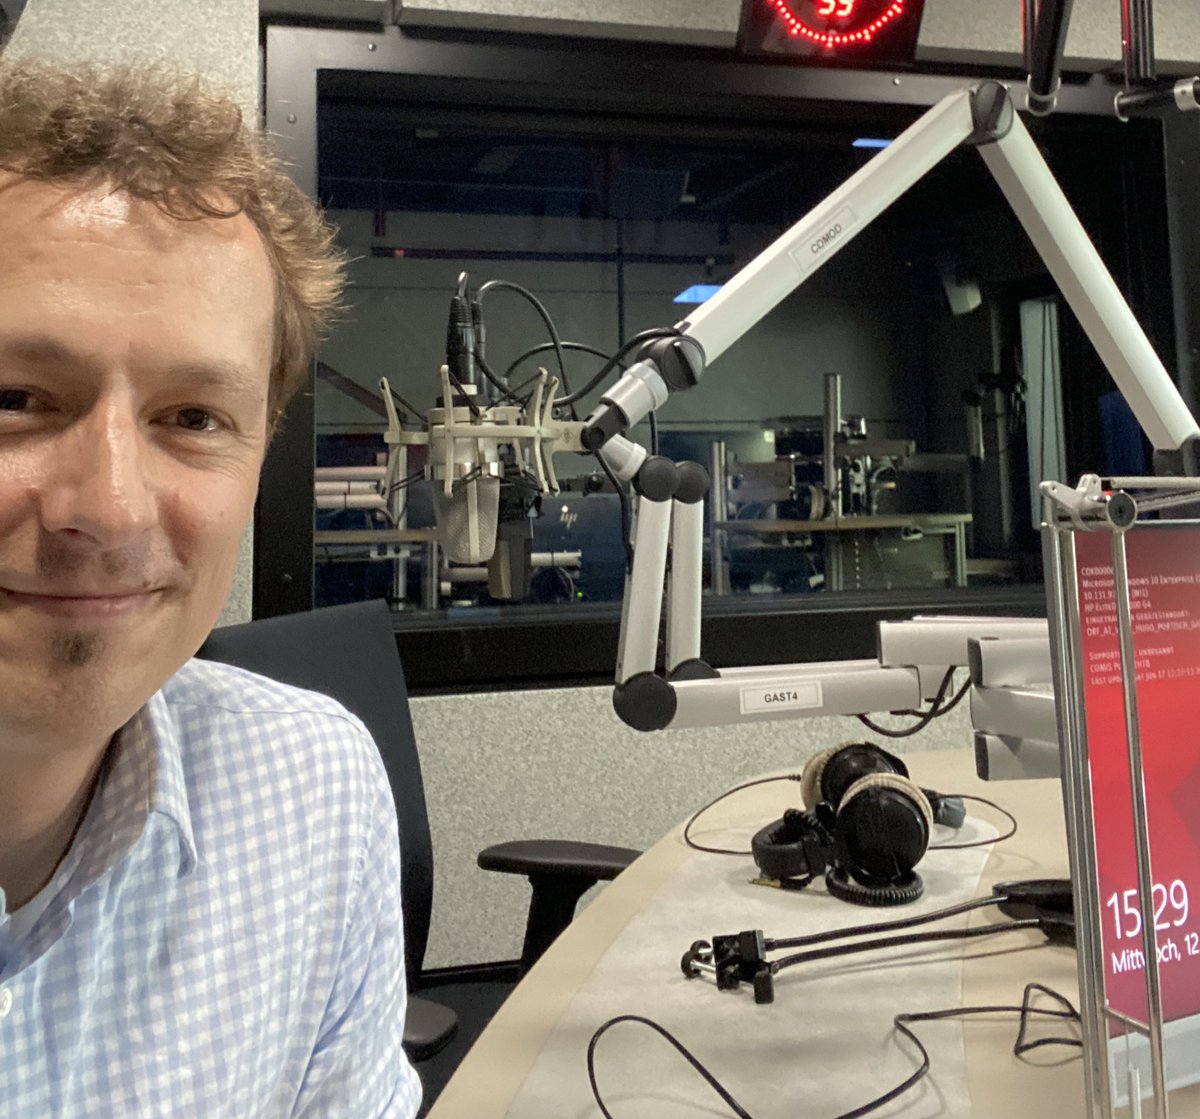 Thank you @oe1 (= Austrian version of NPR) for the invitation to talk about #ai in #dermatology and #medicine! Kudos to Robert Czepel for guiding the discussion. Soon on national #radio (link will follow).